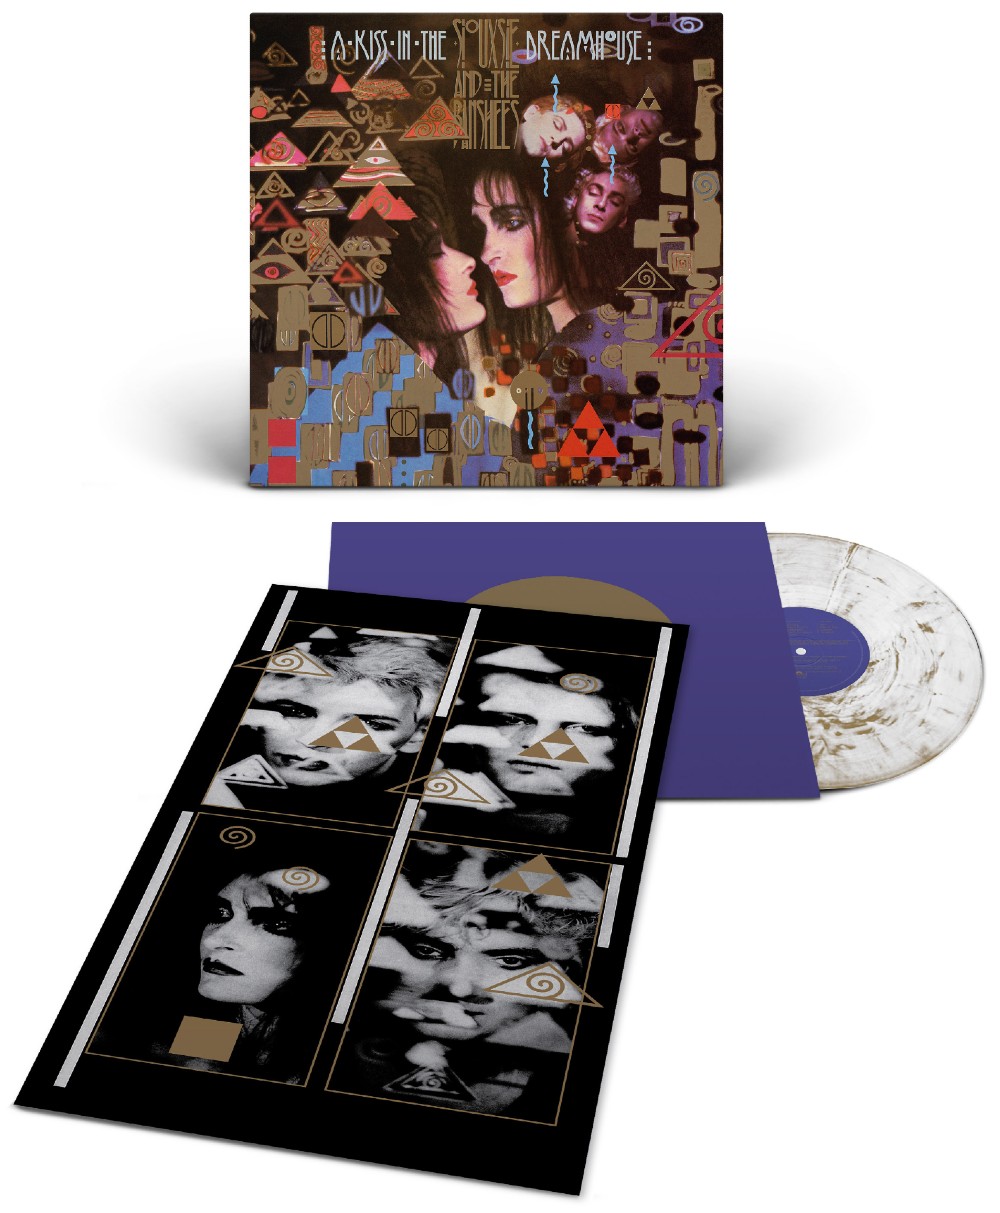 Siouxsie and the Banshees - 'A Kiss in the Dream House'. 2023 RSD